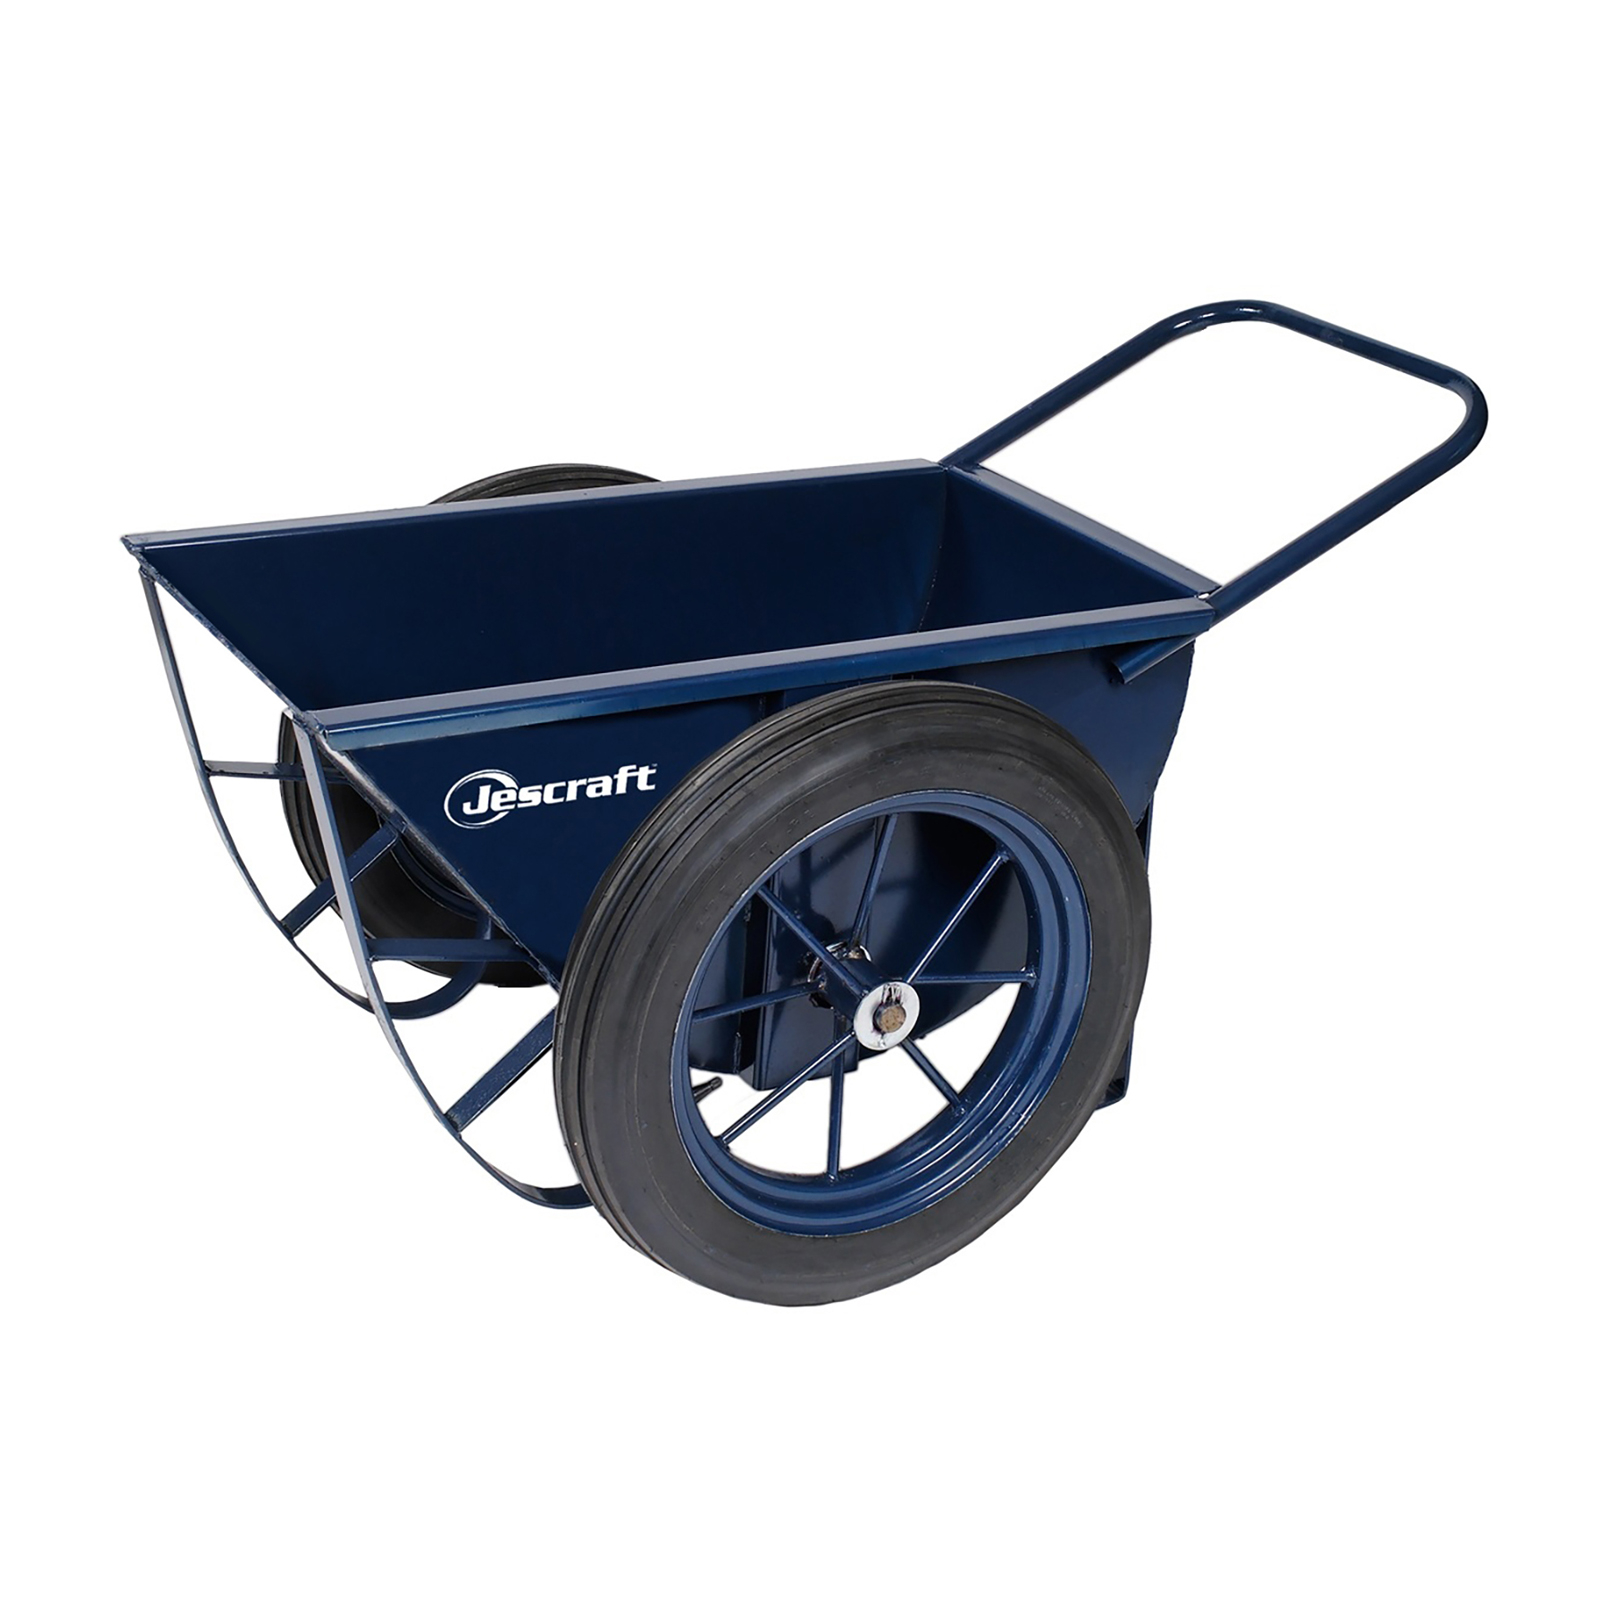 cement buggy for sale